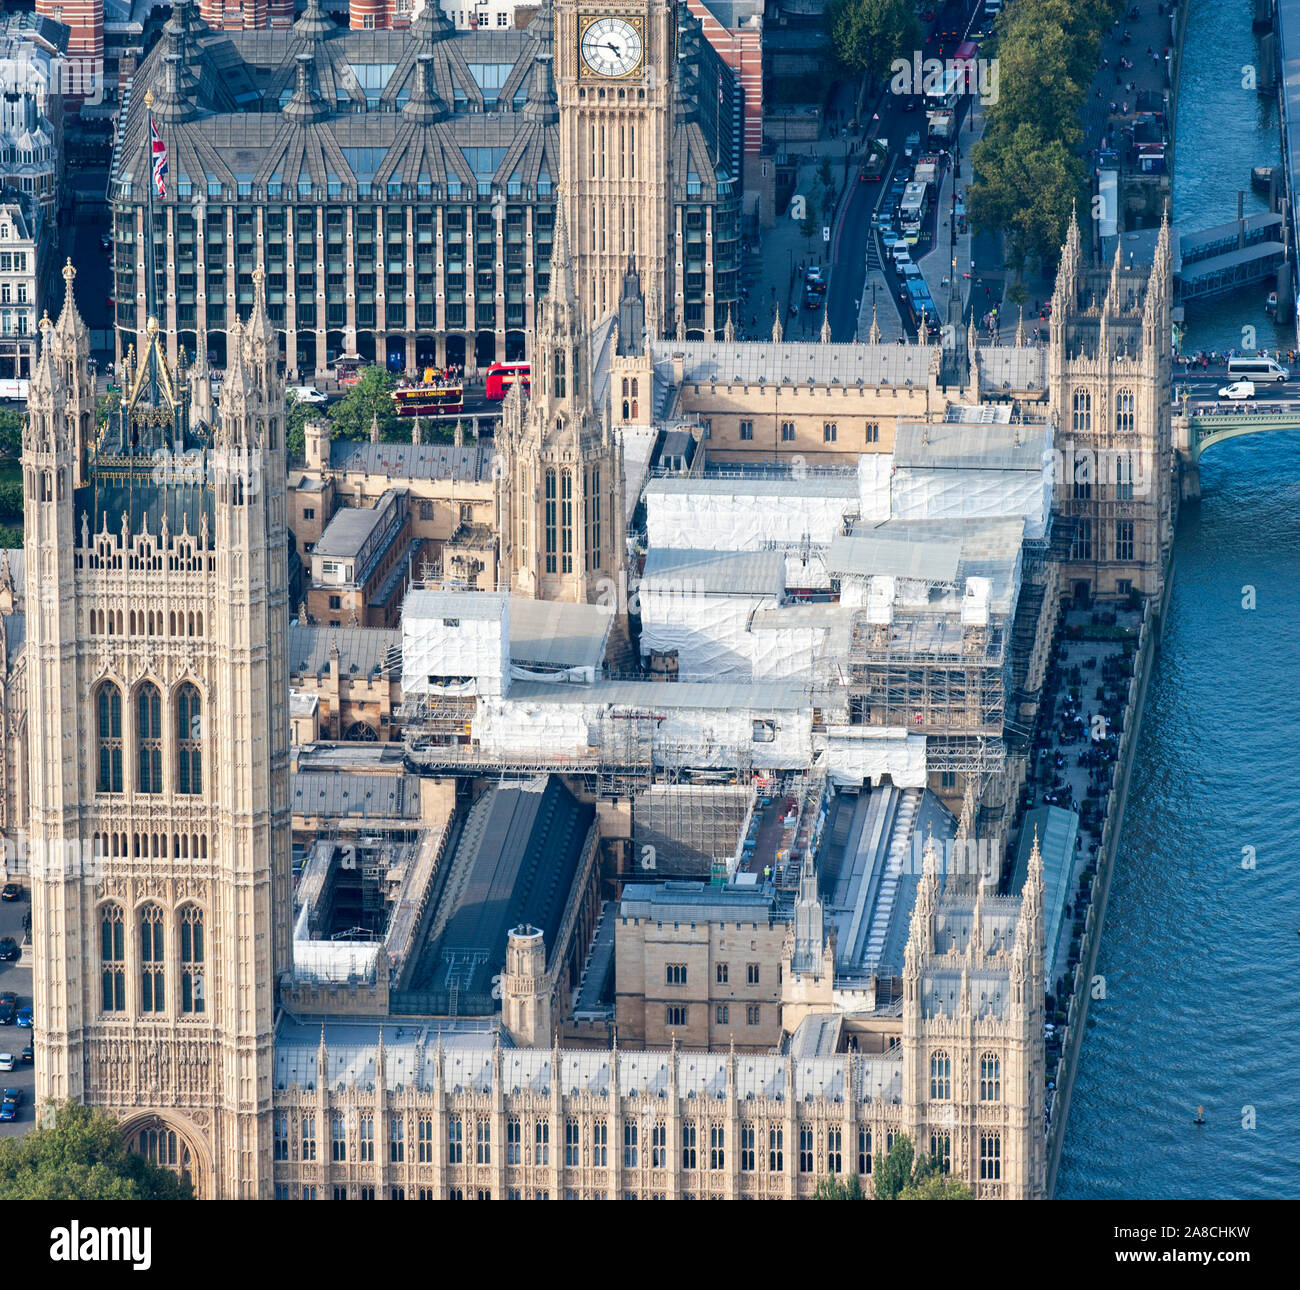 Work has begun on the 6 billion pound restoration and repair project on Houses of Parliament. The Joint Committee on the Palace of Essential renovations  is forecast to take eight years to complete.  15/09/2016 Stock Photo